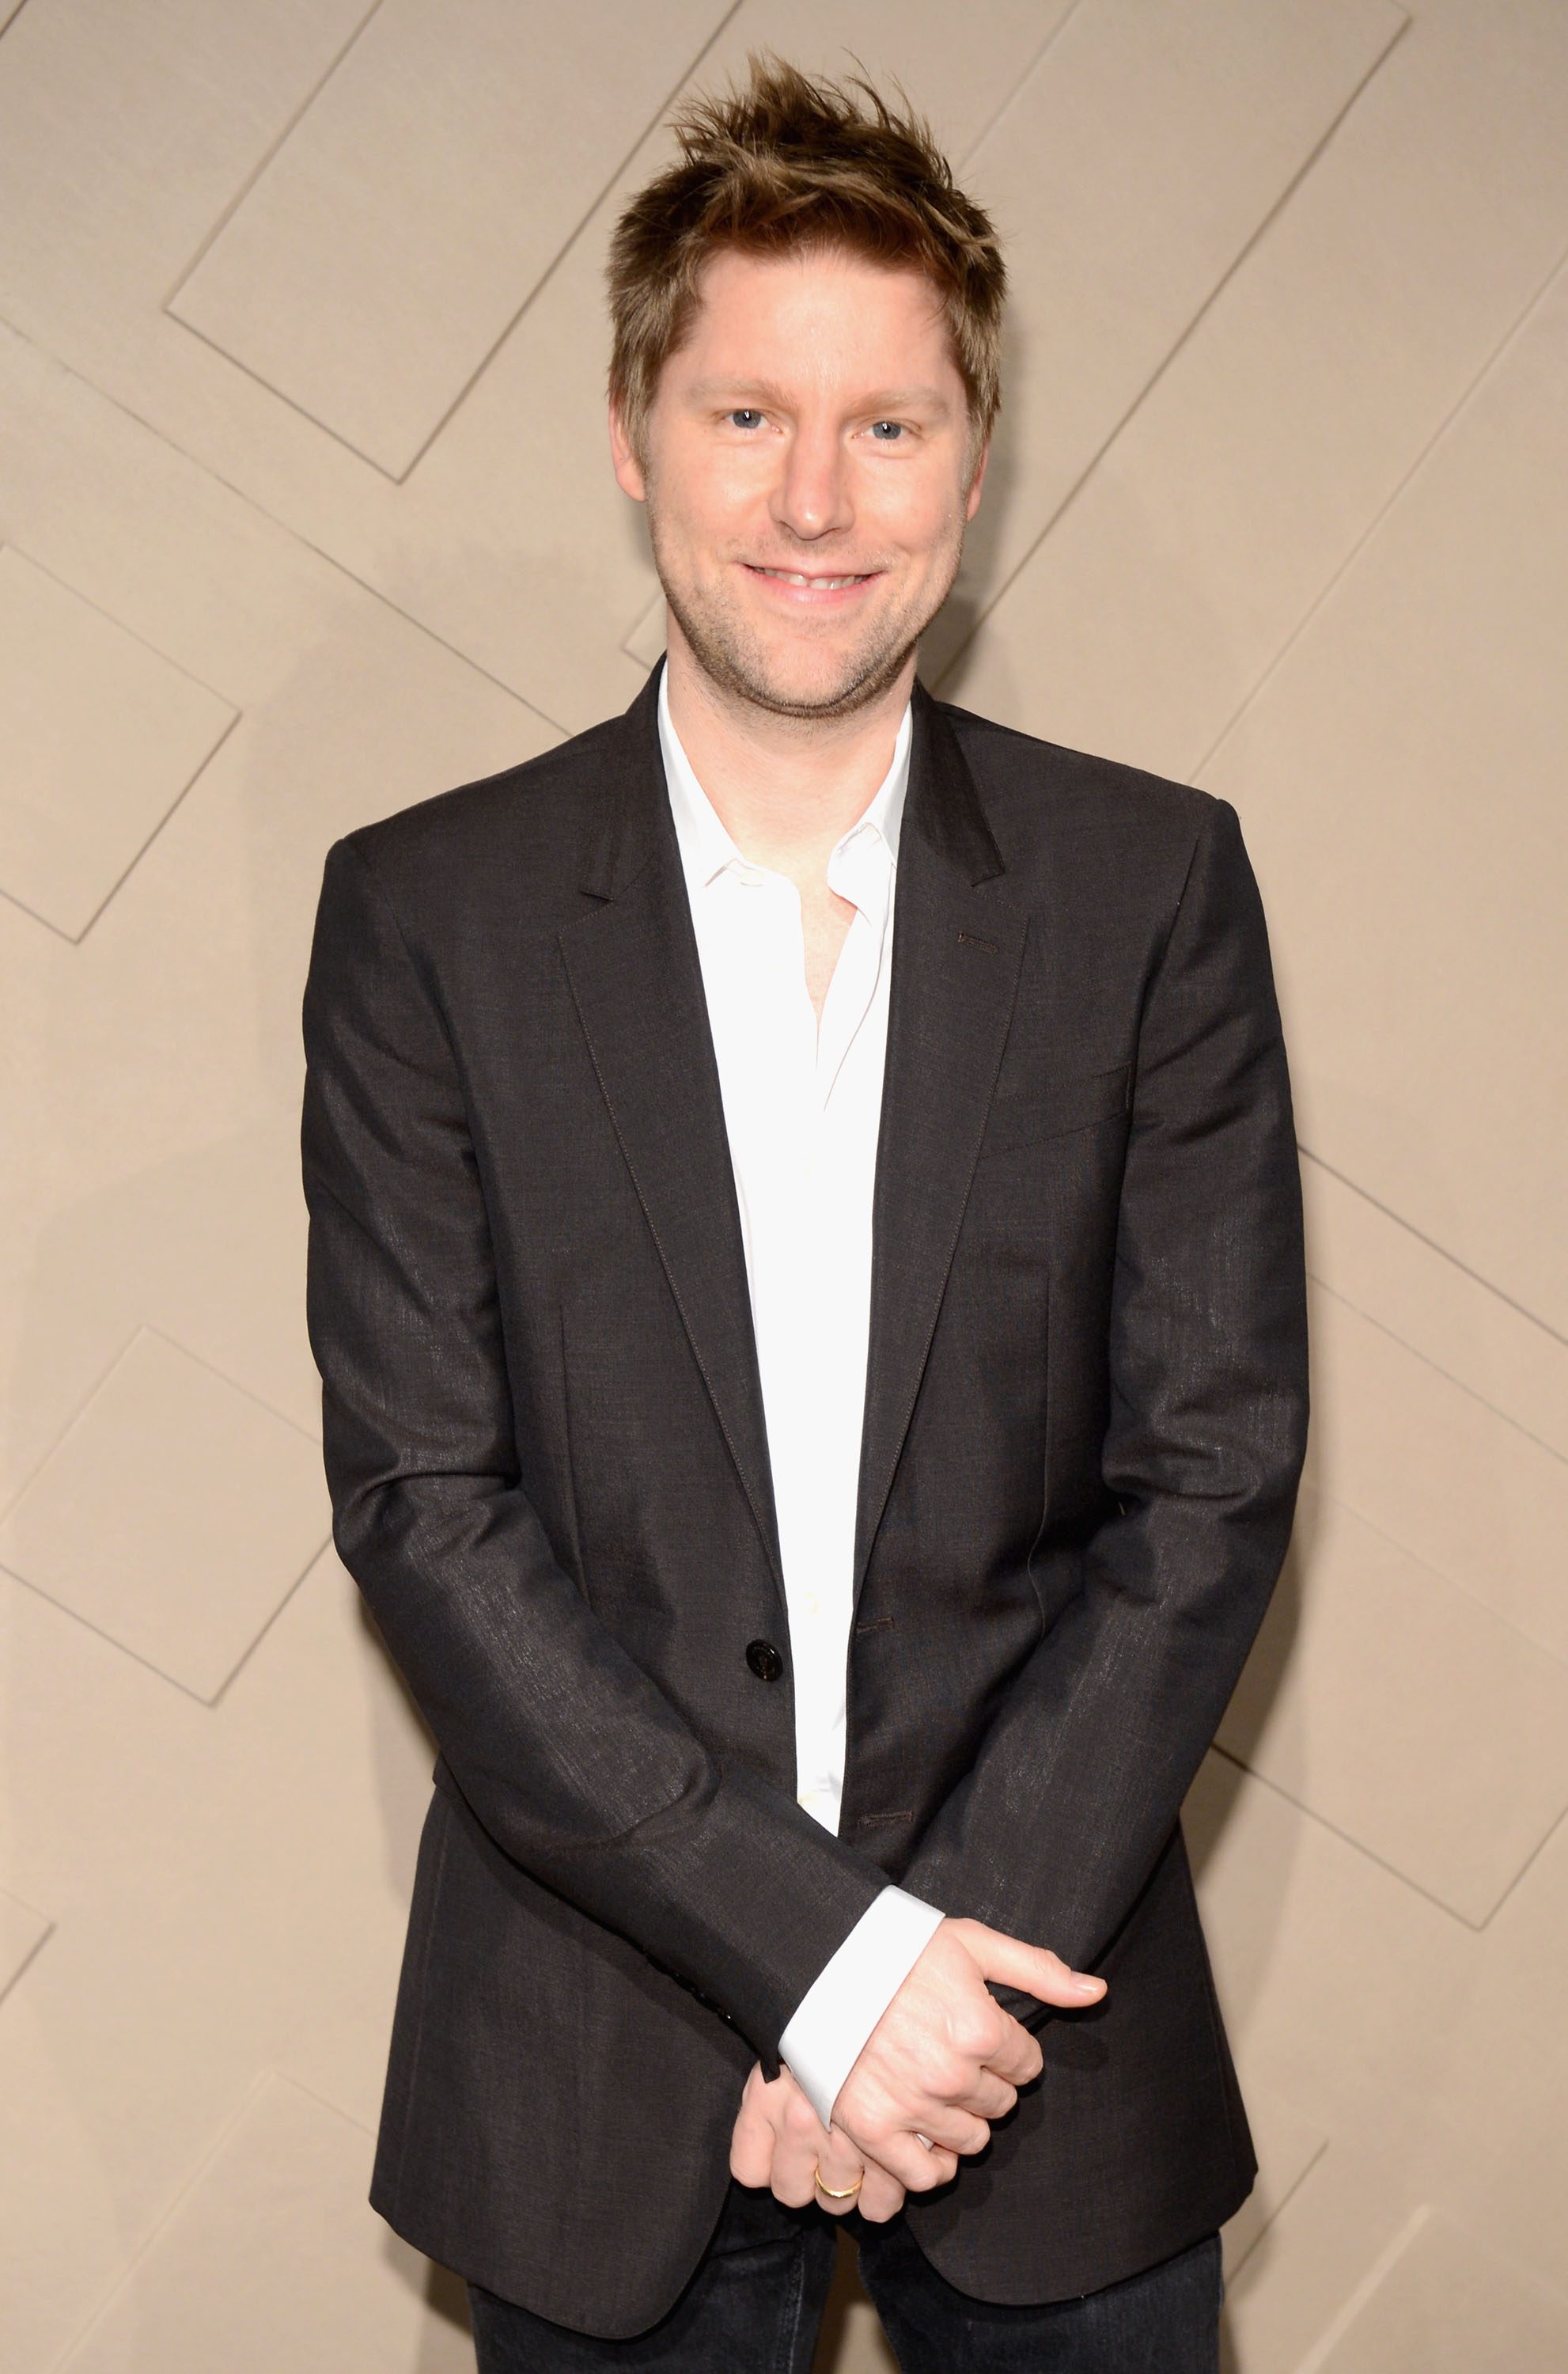 Burberry's Christopher Bailey Dishes To Tim Blanks On His Role As CEO